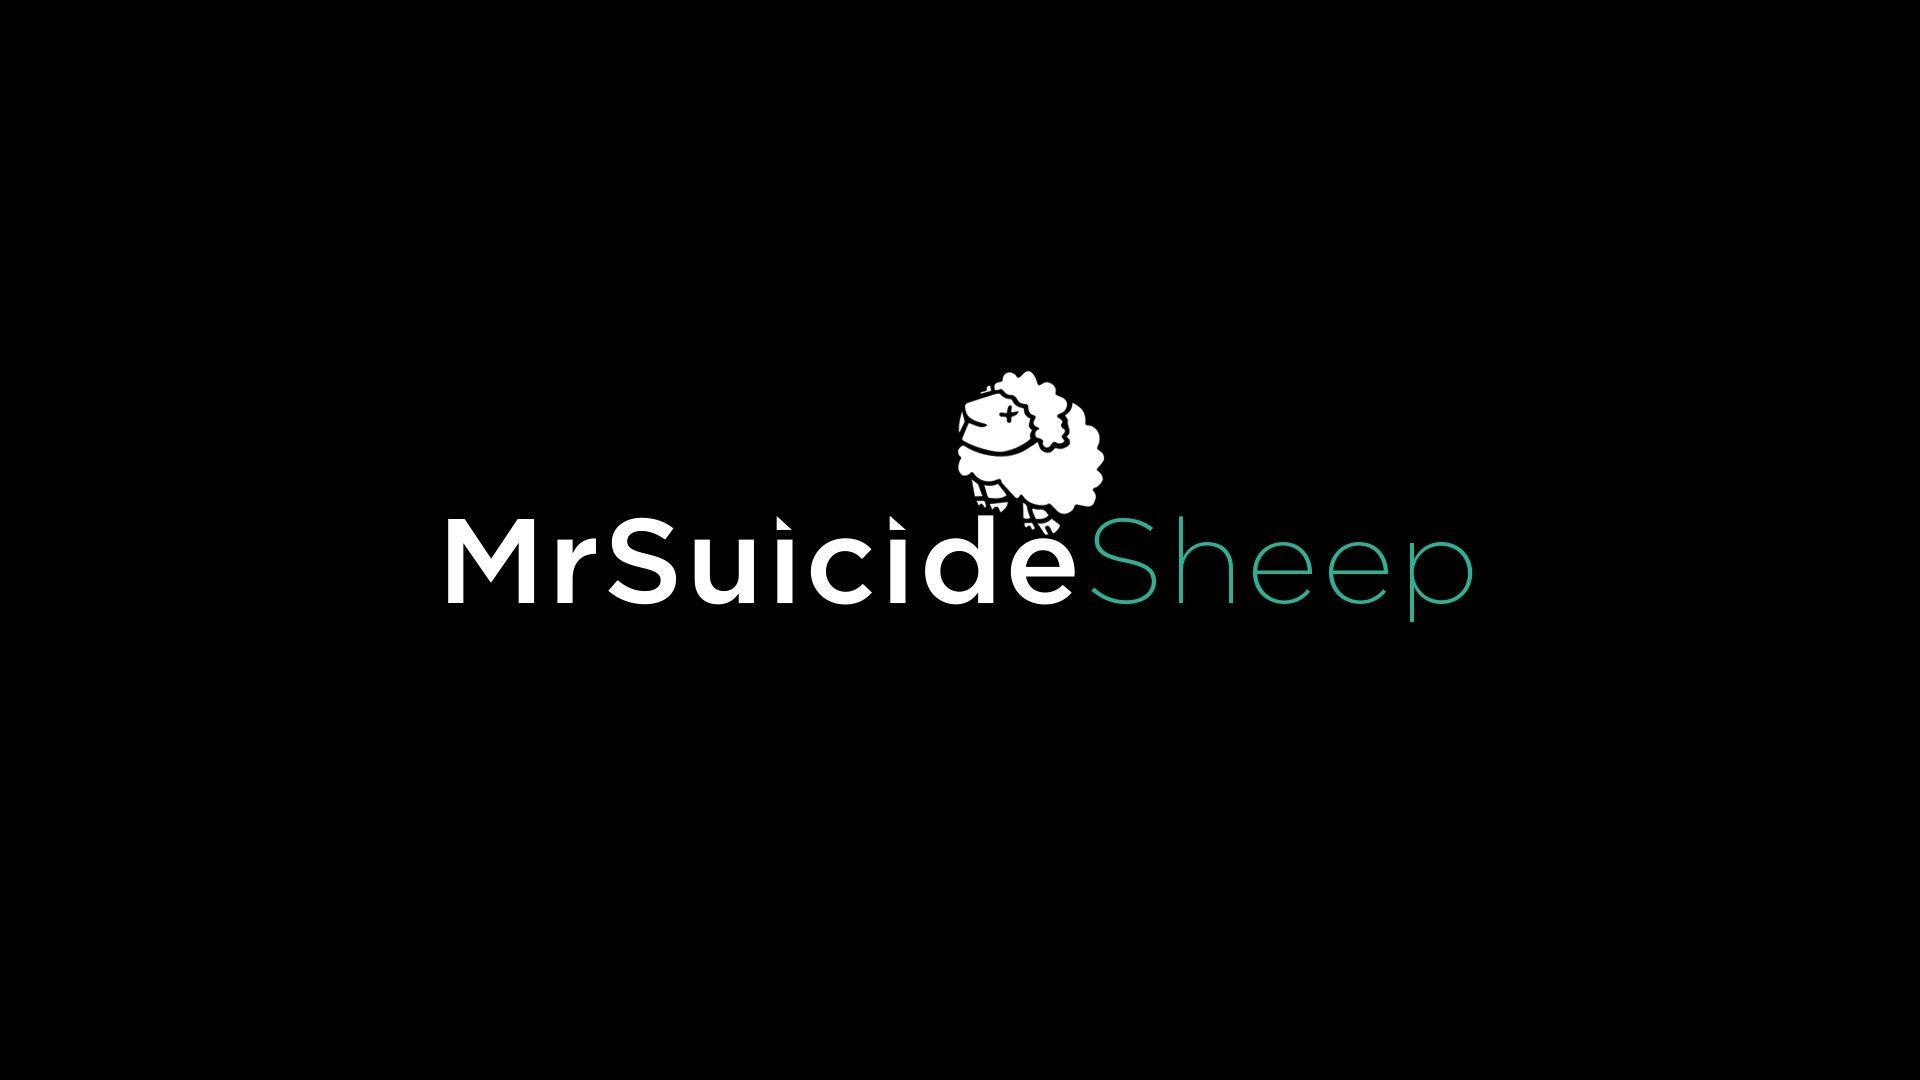 Suicide Sheep Wallpaper HD / Desktop and Mobile Background